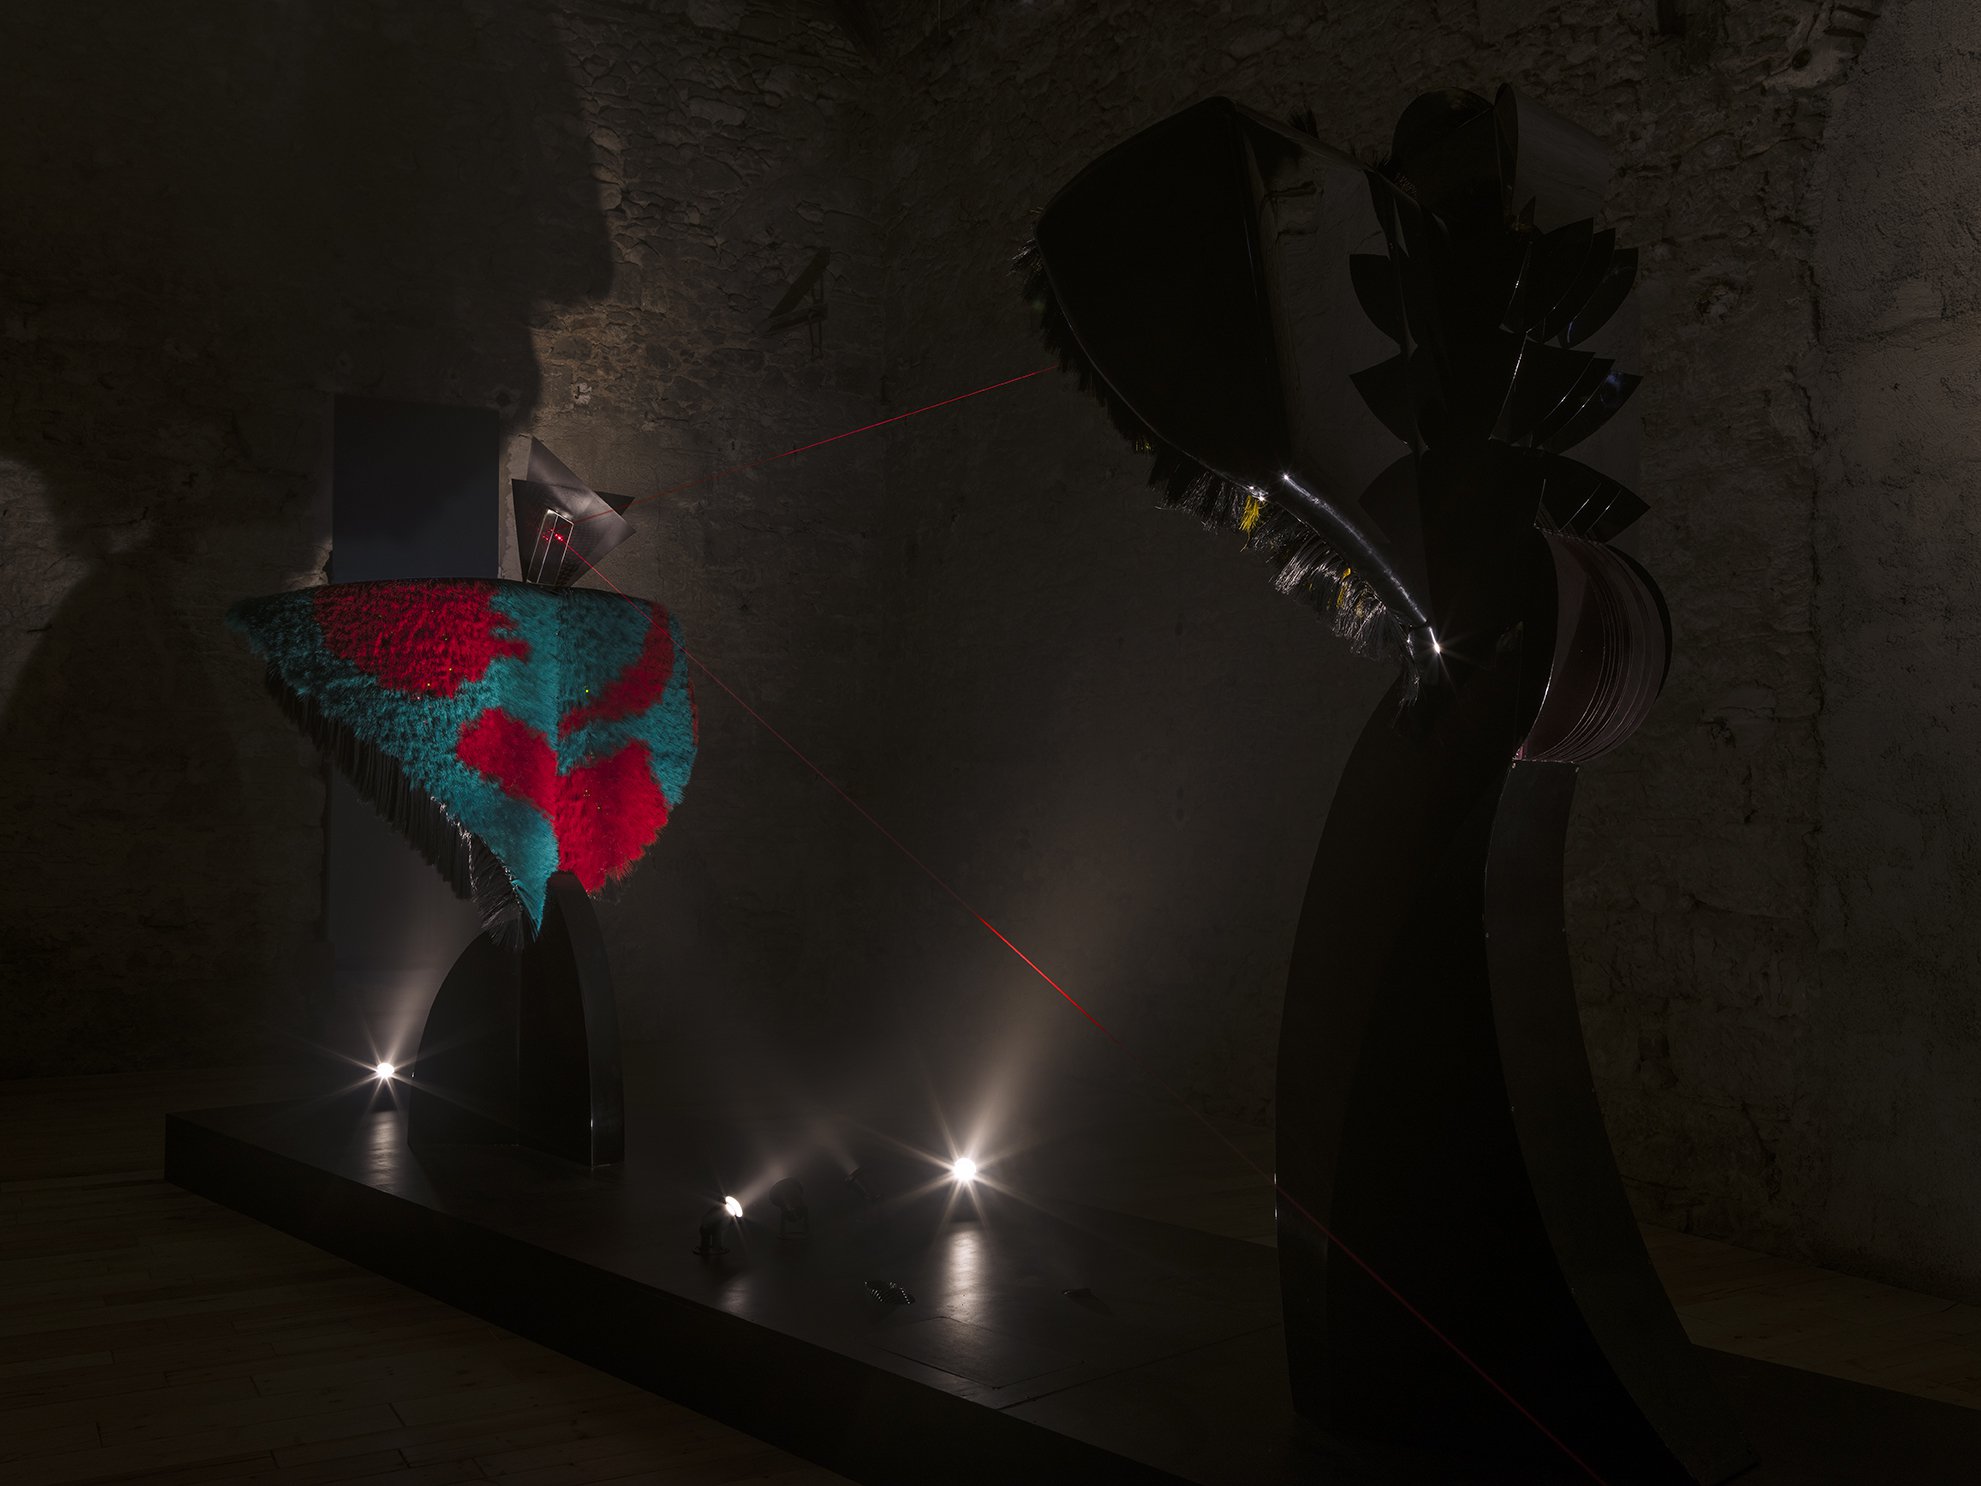 Liliane Lijn, Conjunction of Opposites: Woman of War and Lady of the Wild Things, installation of two mixed media performing sculptures, 400 x 800 x 400 cm (157 1/2 x 315 x 157 1/2 in), 1986